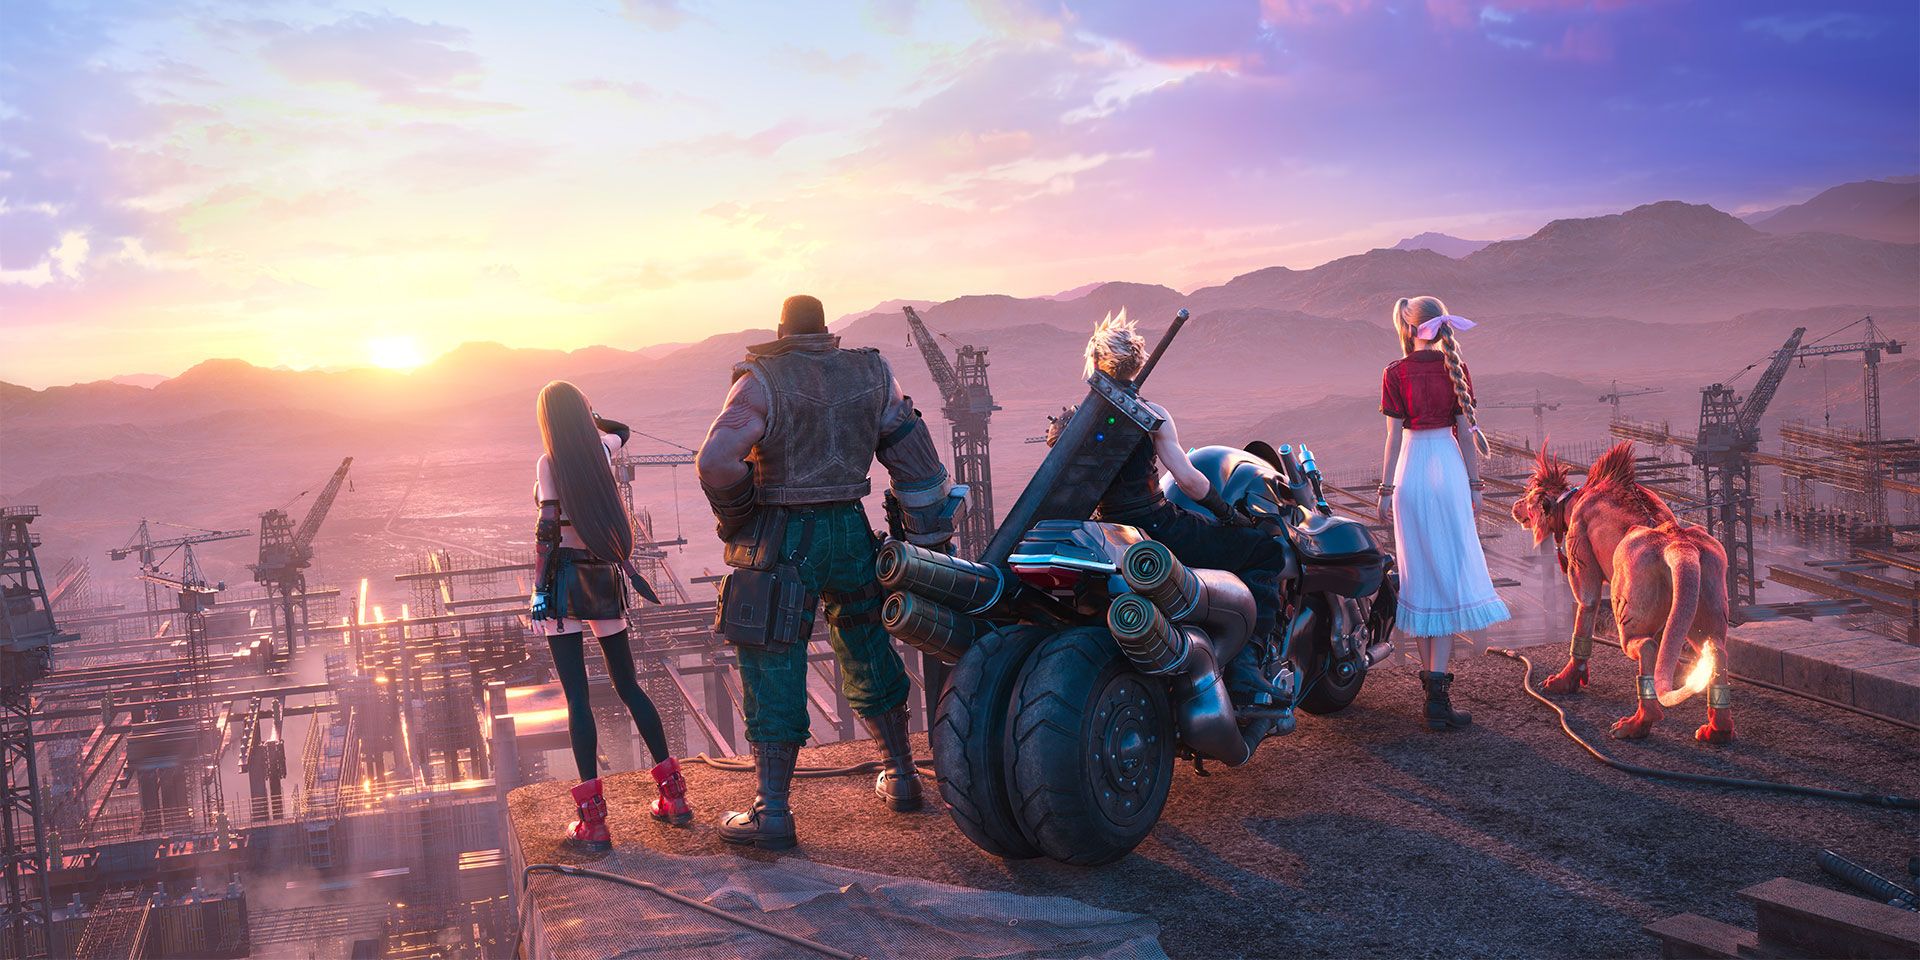 Tifa, Barret, Cloud, Aerith, and Red XIII gaze upon the open world during the ending of the Final Fantasy VII Remake.